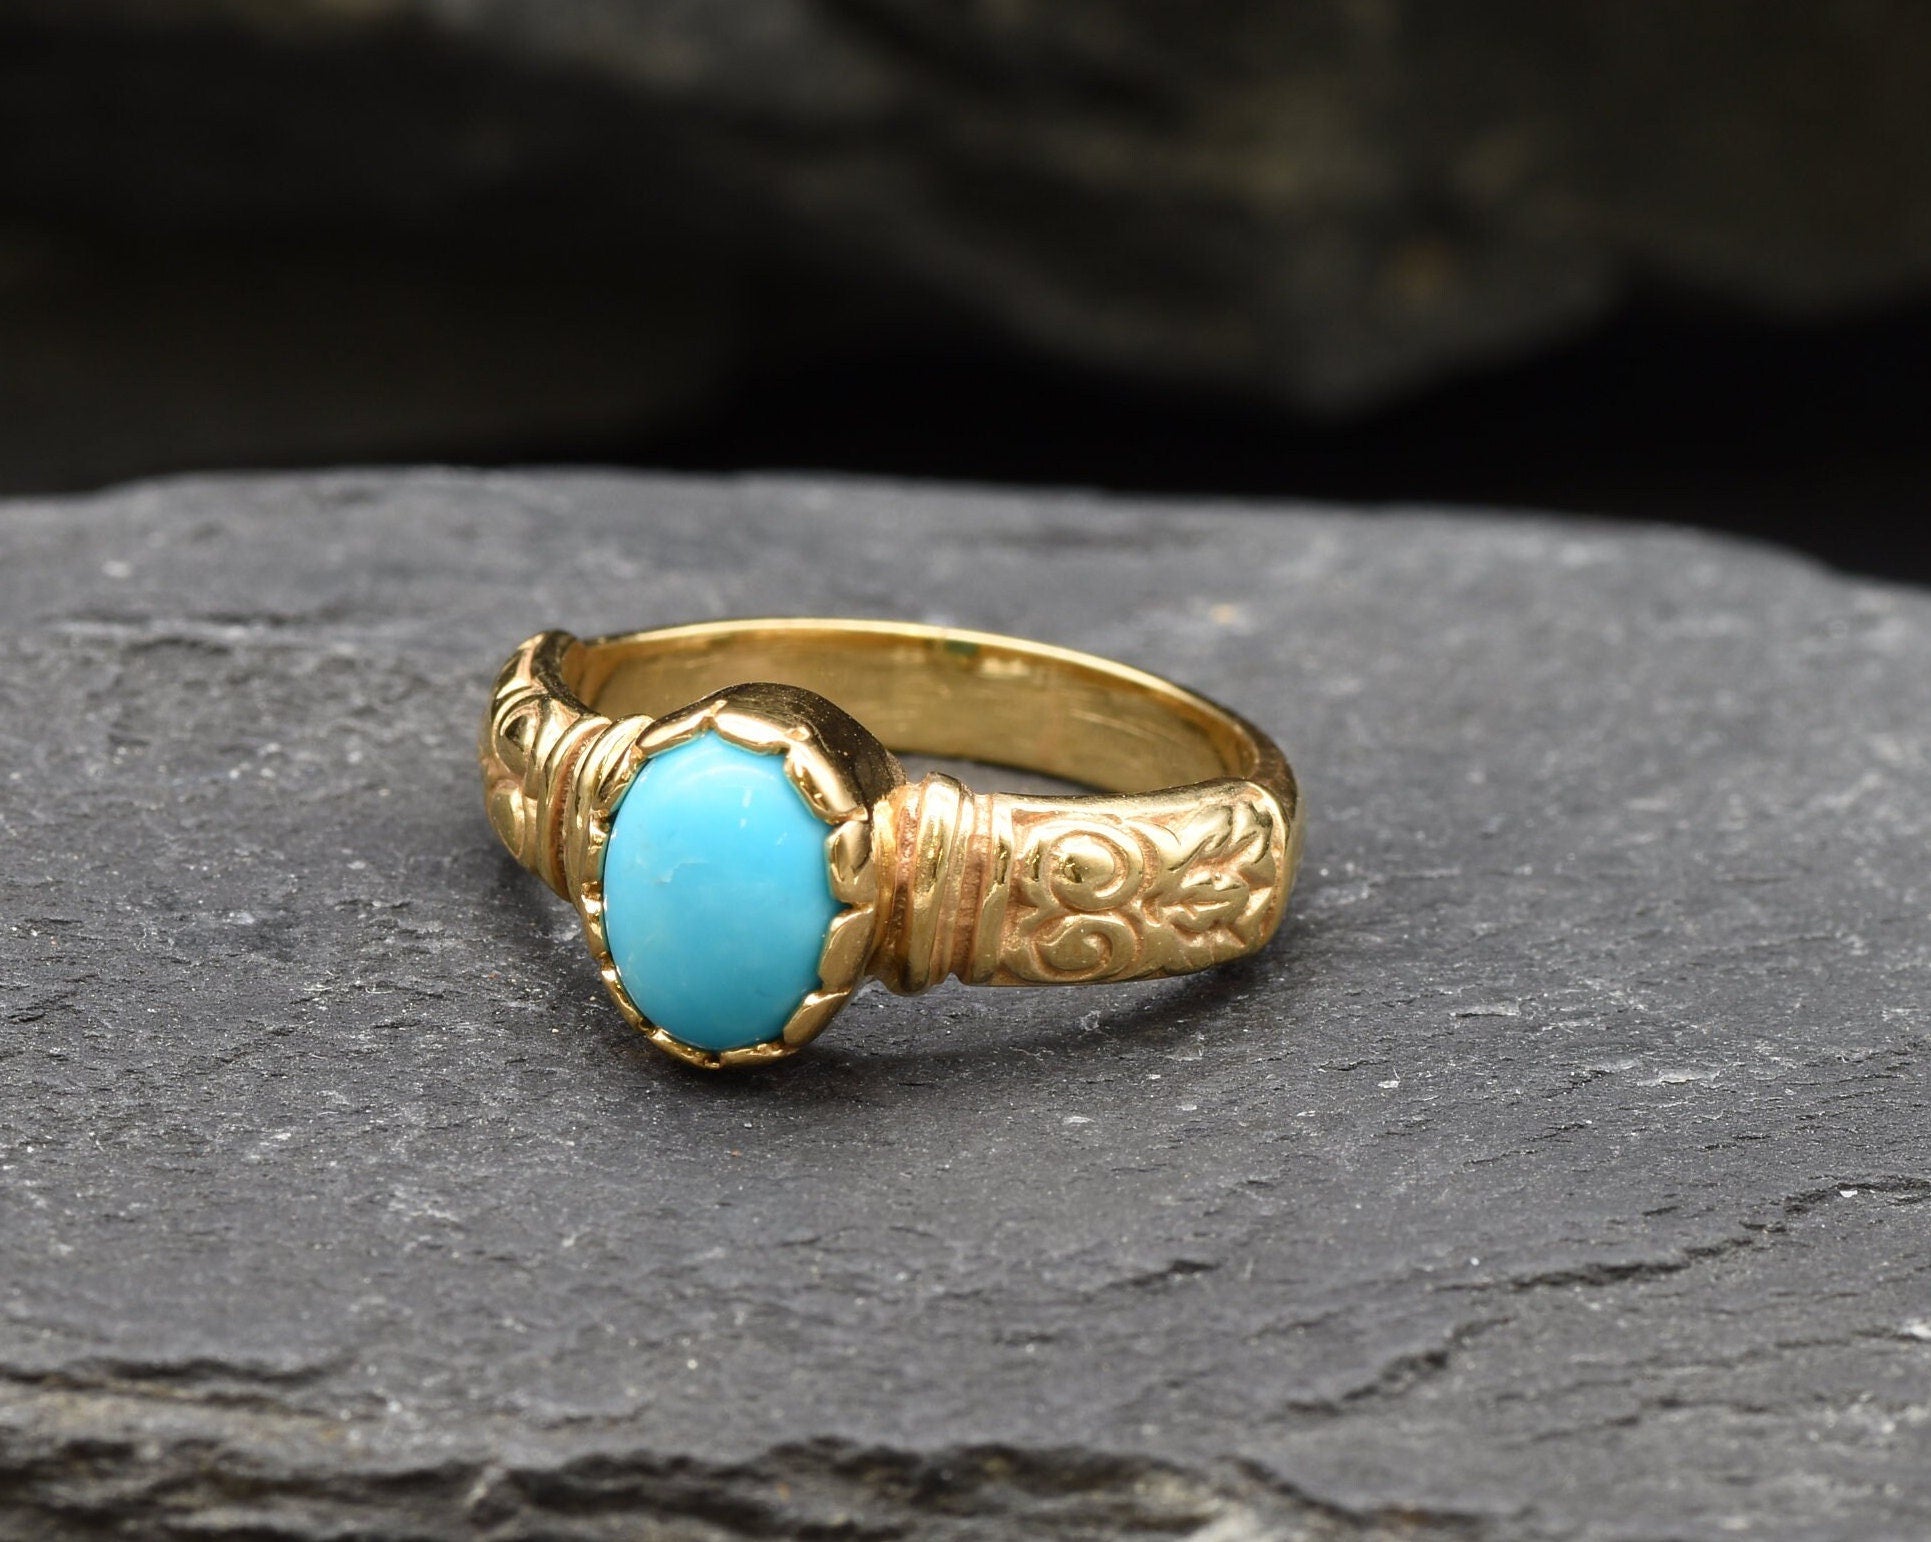 Gold Turquoise Ring, Natural Turquoise, December Birthstone, Gold Tribal Ring, Blue Turquoise Ring, Boho Ring, Vermeil Ring, Real Turquoise